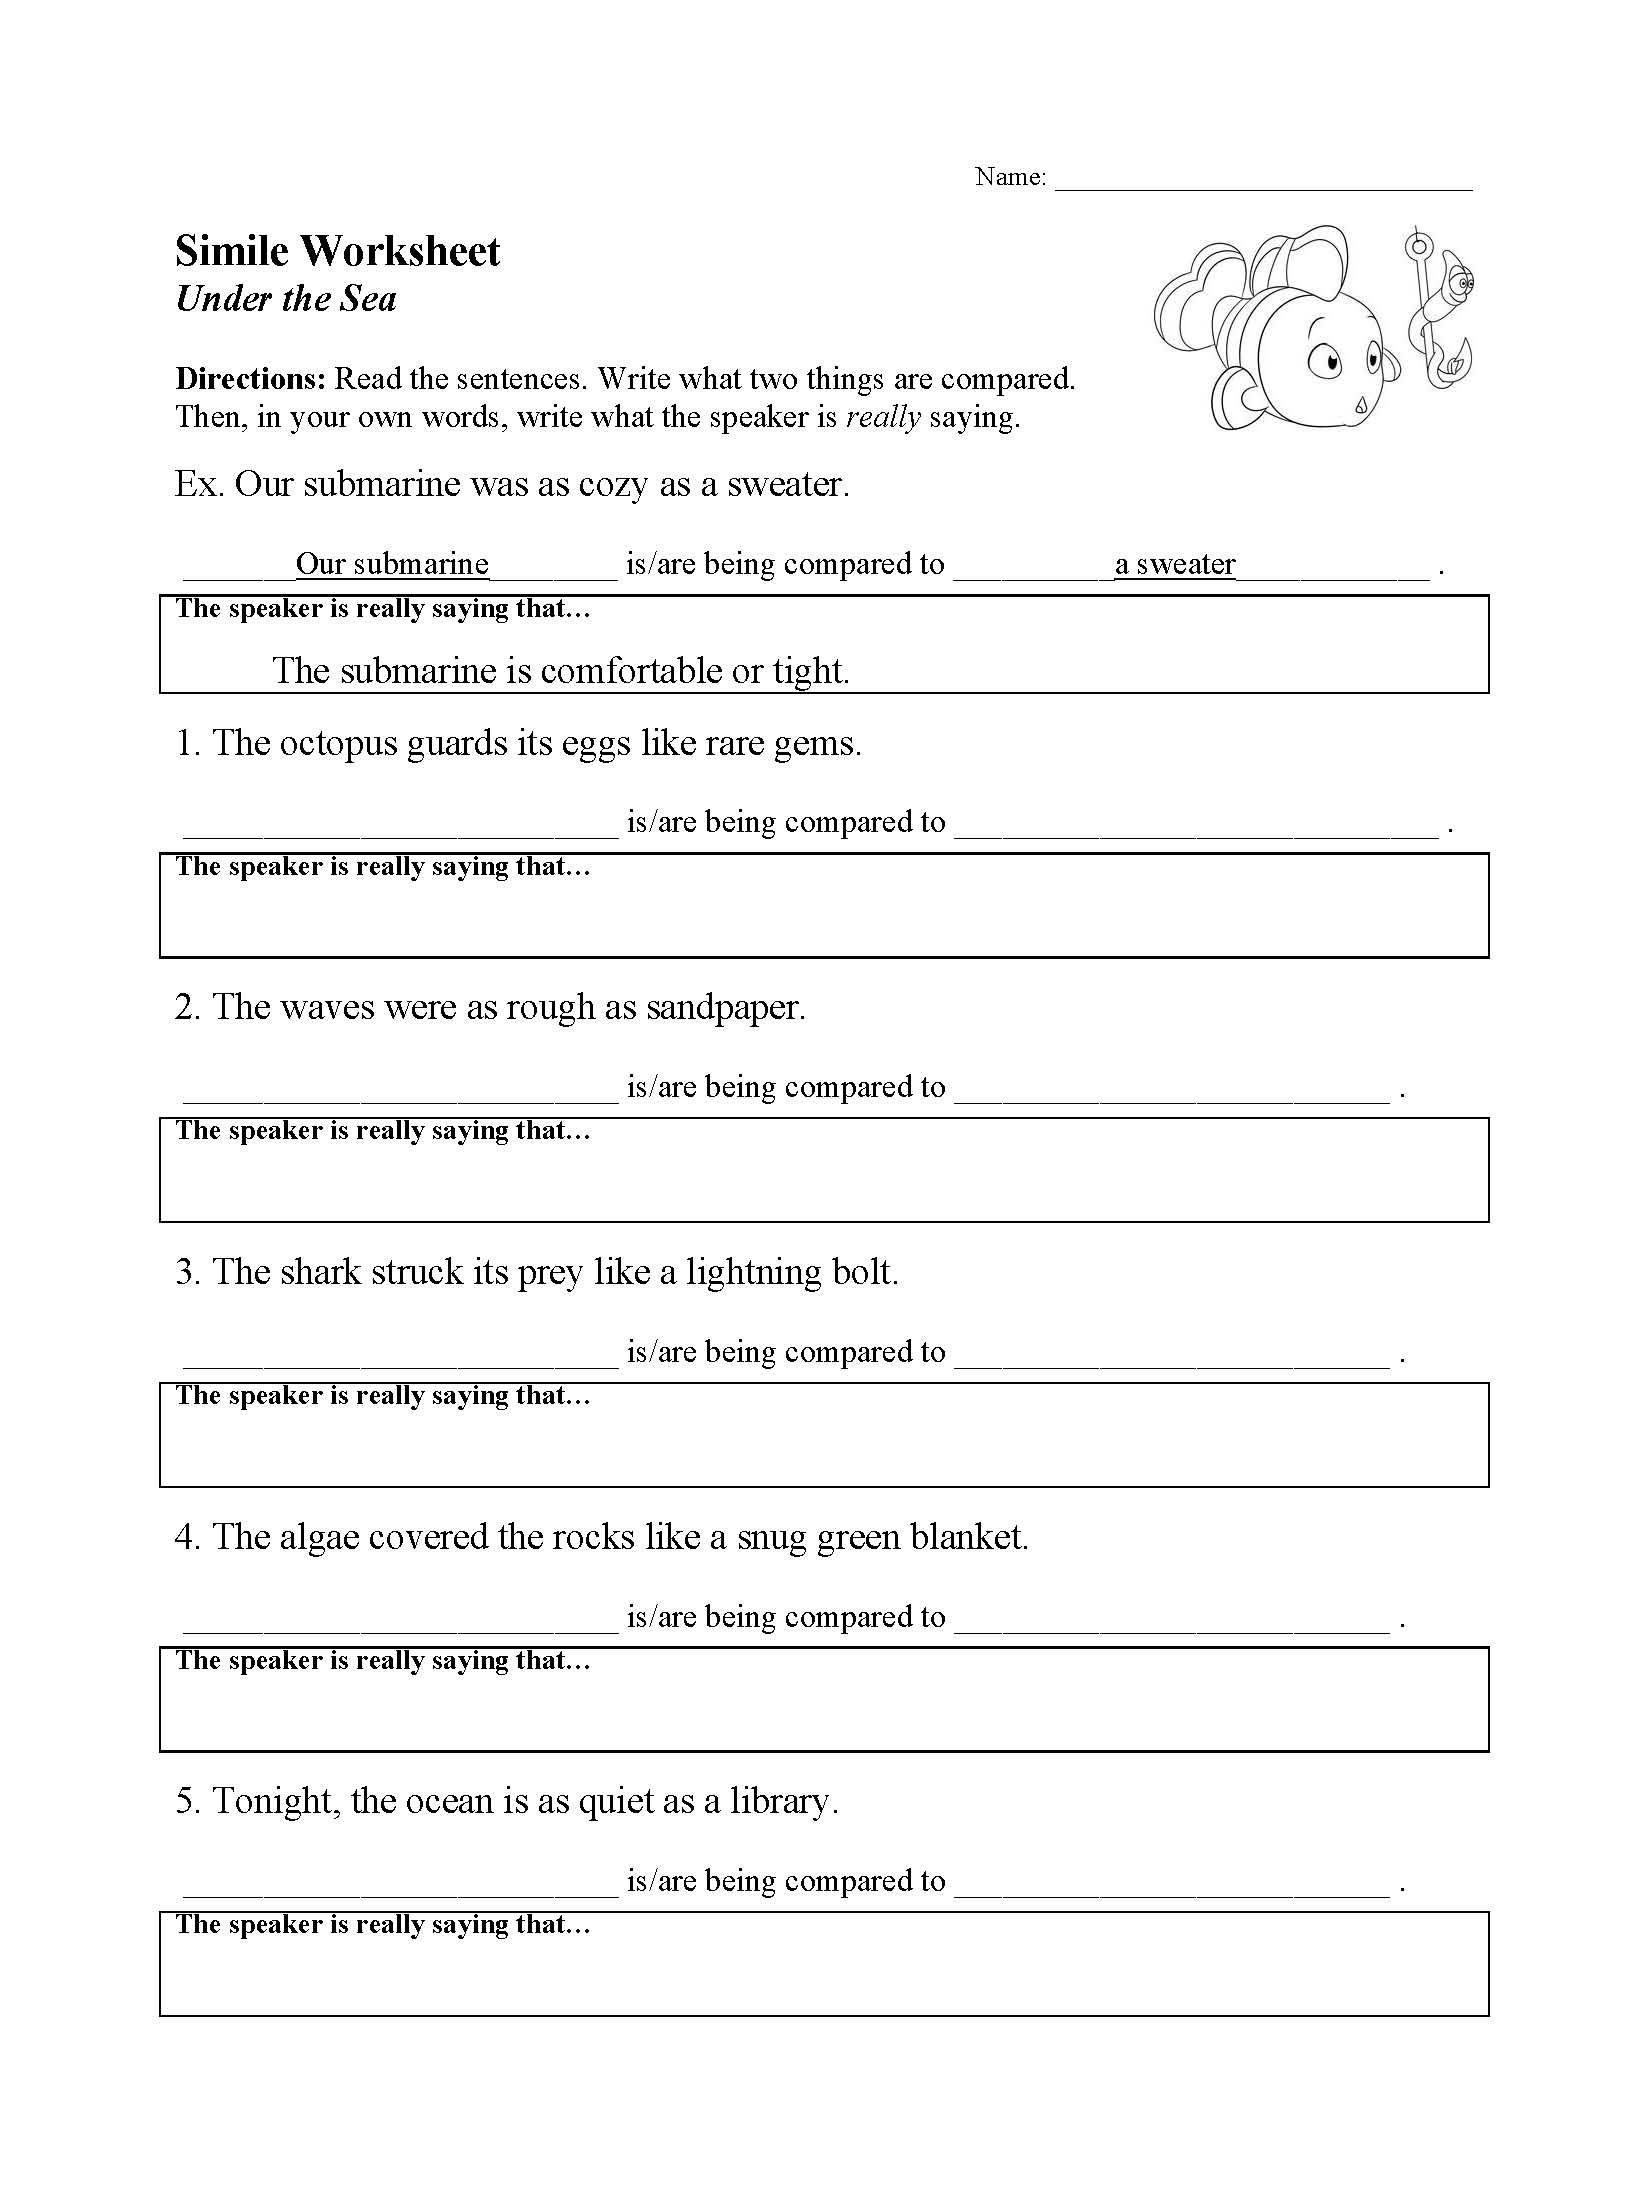 This is a preview image of our Elements of Fiction Worksheets. Click on it to view all of our elements of fiction worksheets.